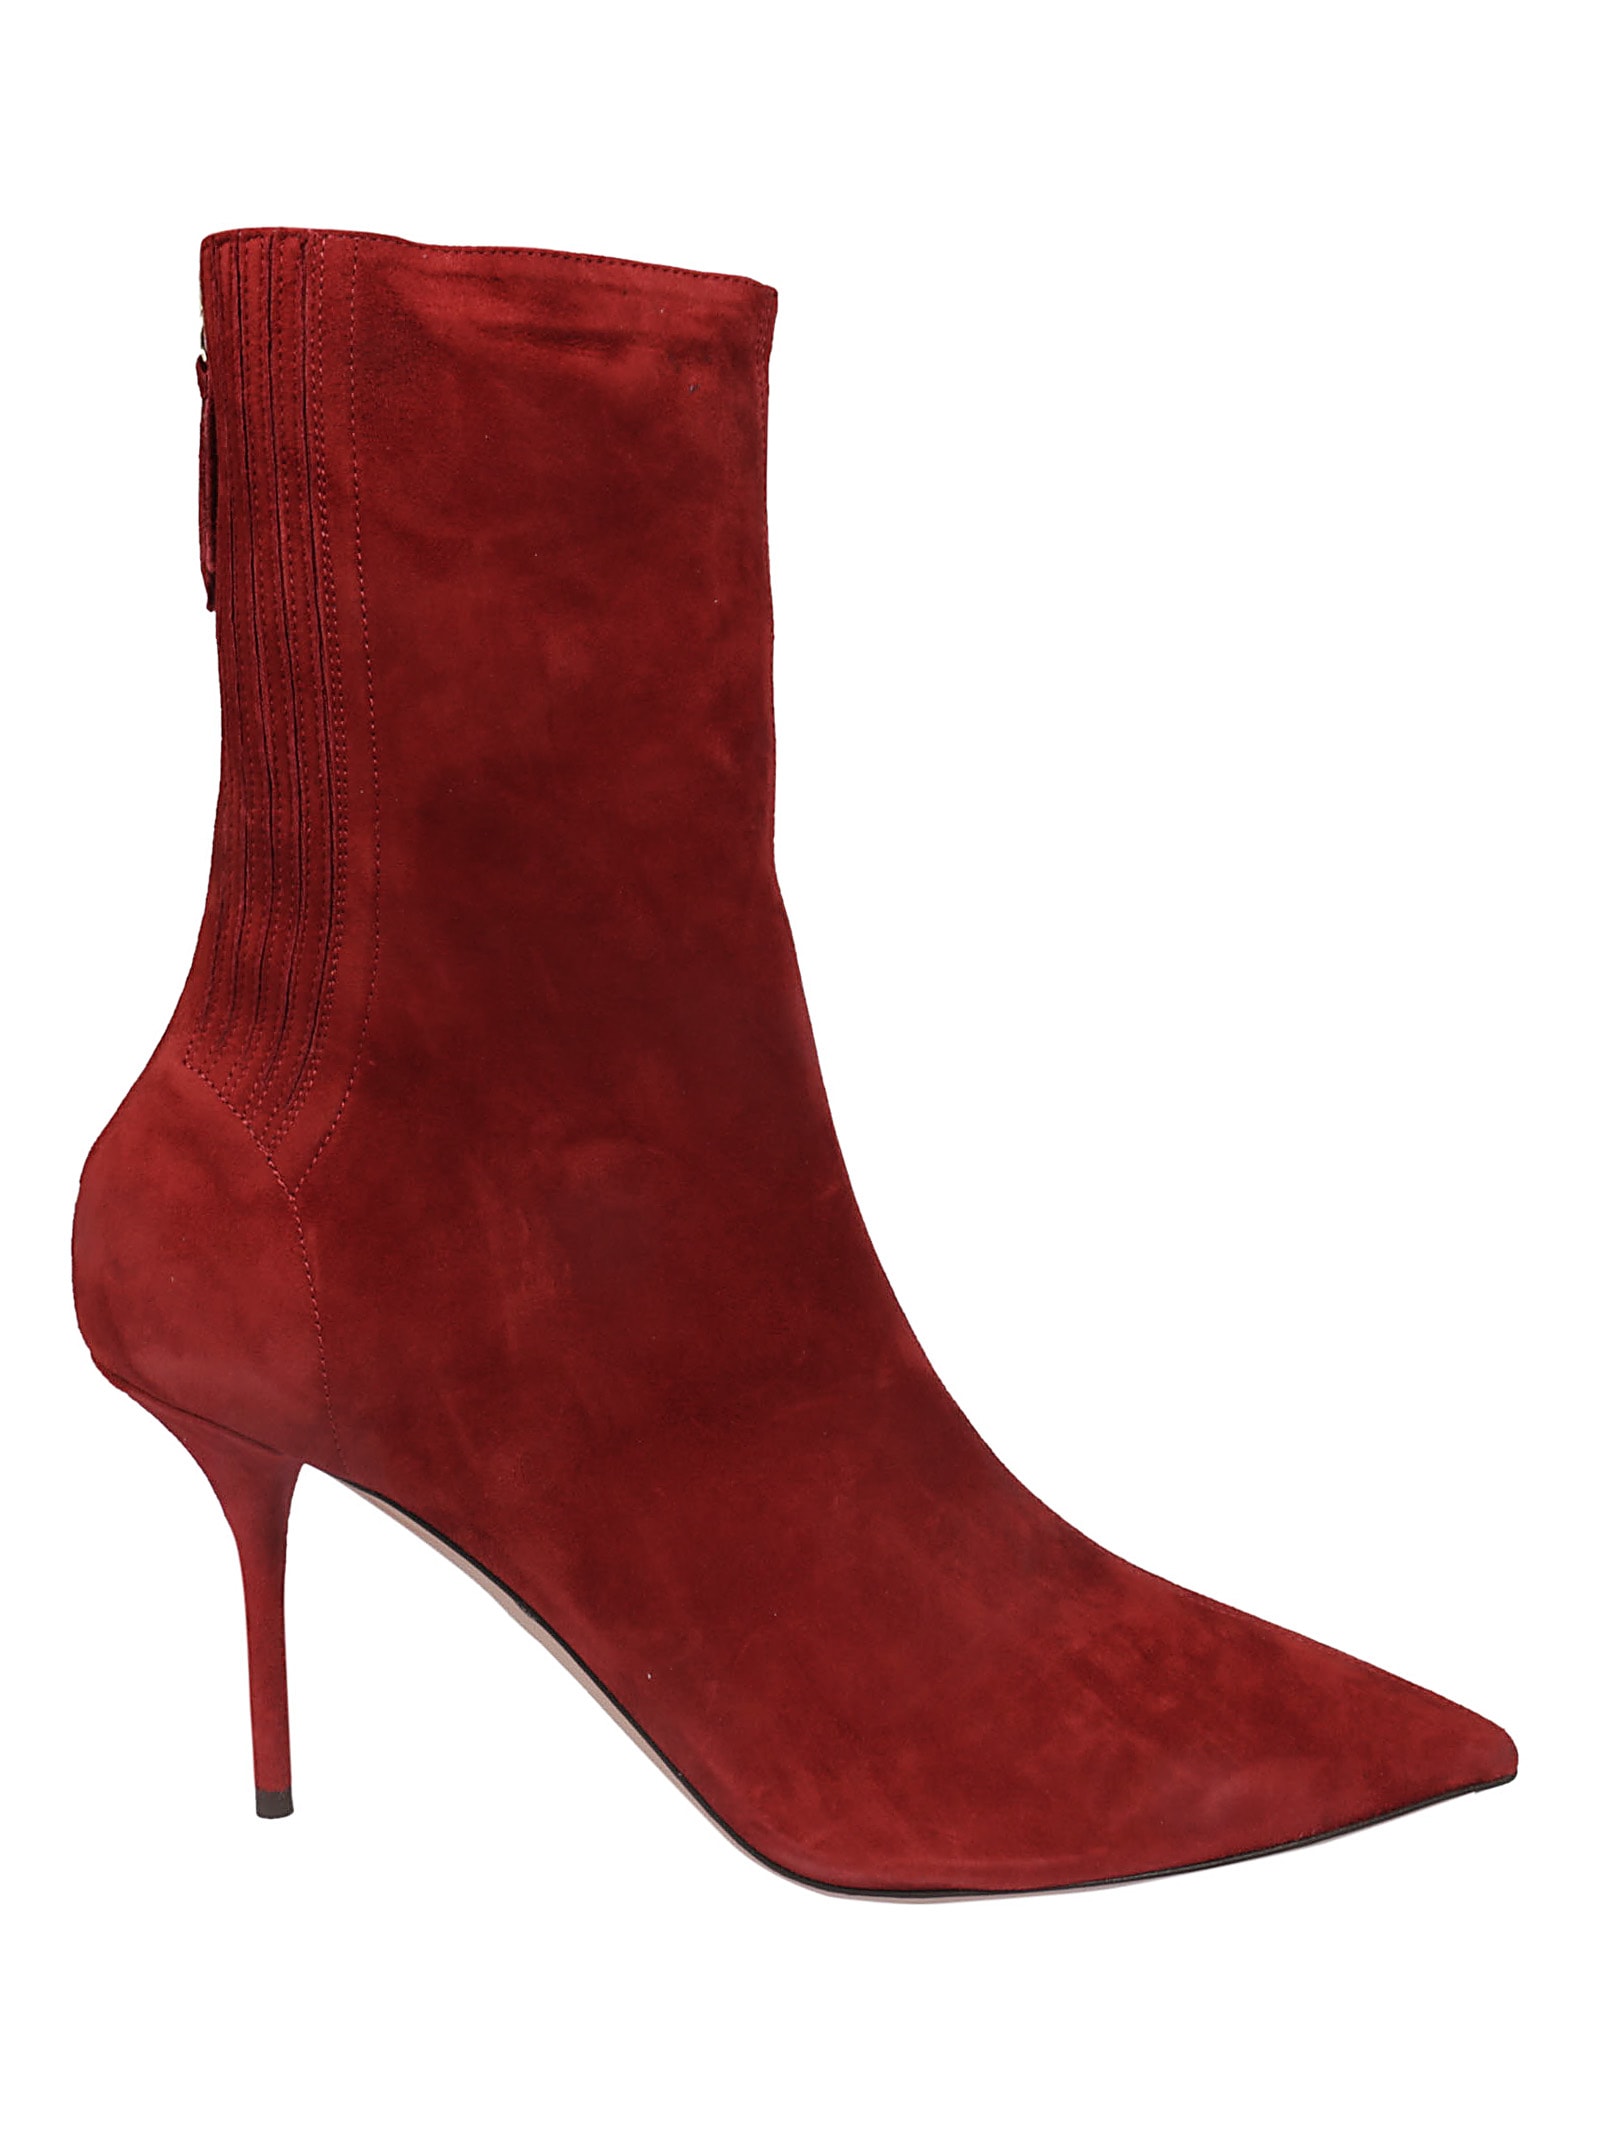 red pointed toe ankle boots